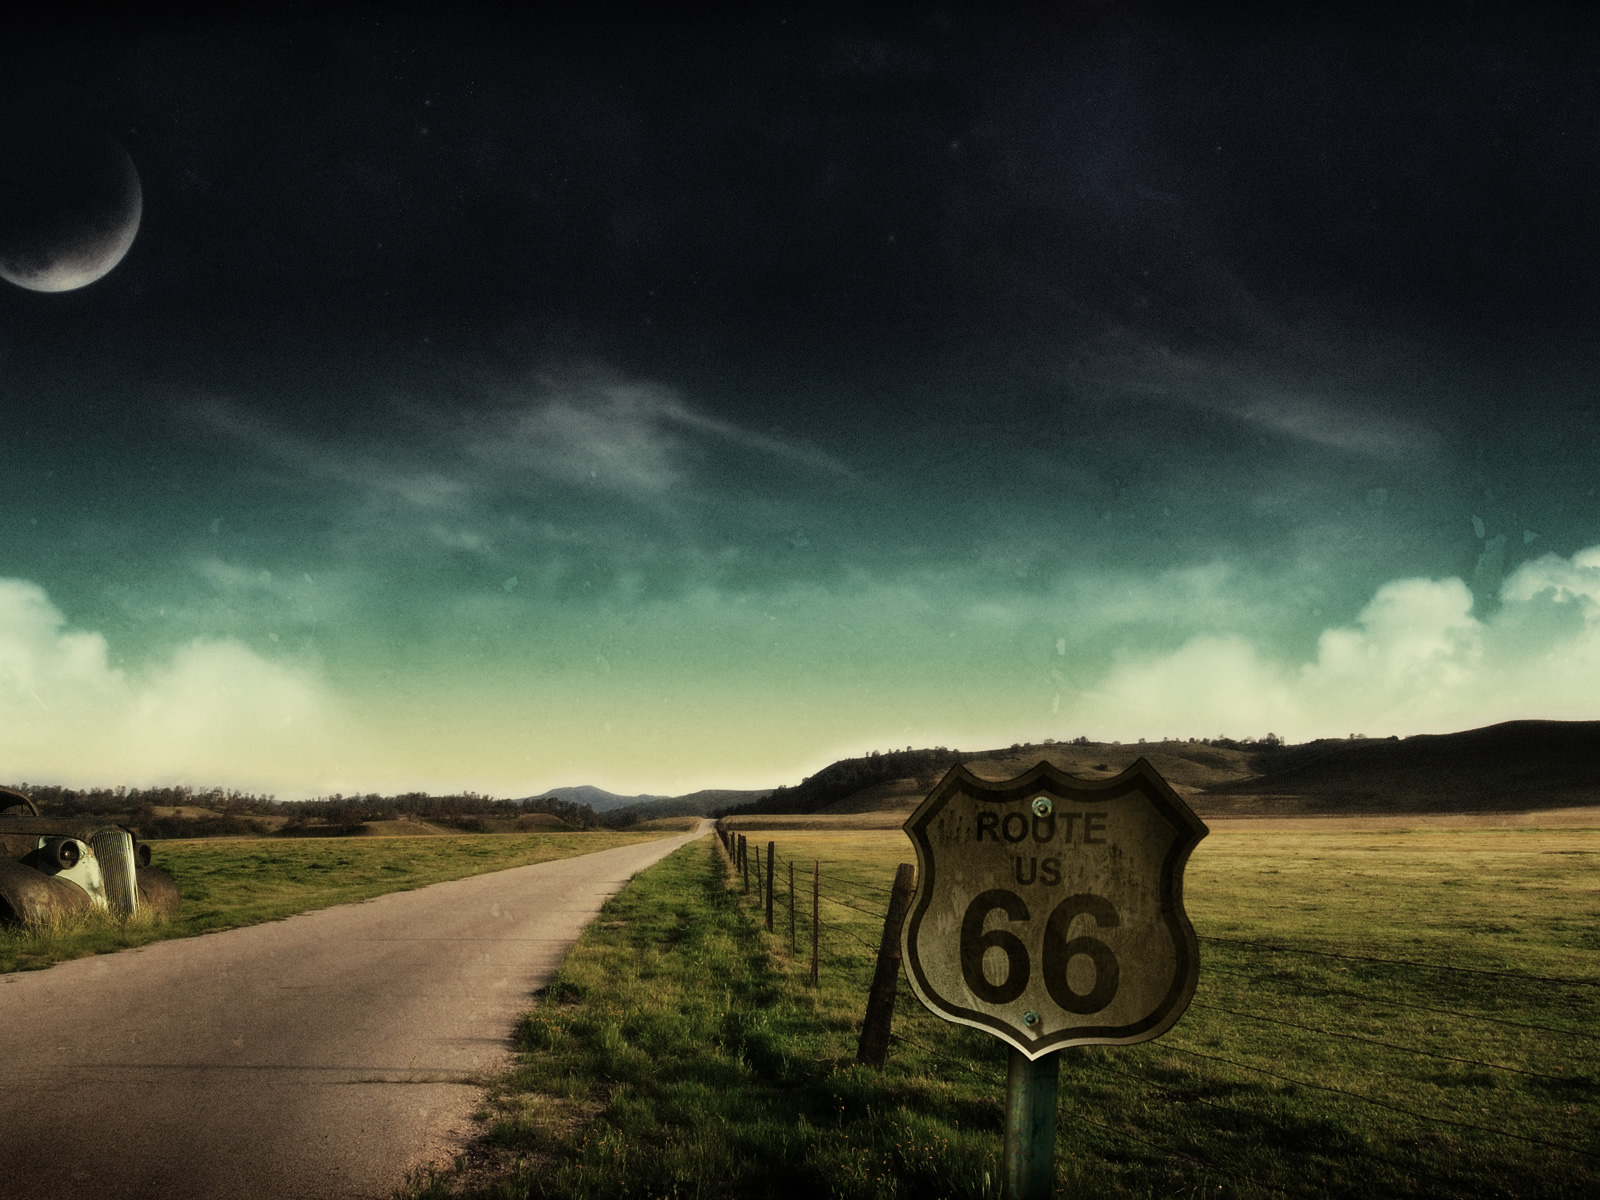 Free Download 1600x10 Route 66 Desktop Pc And Mac Wallpaper 1600x10 For Your Desktop Mobile Tablet Explore 49 1600 X 10 Wallpaper Free Springtime Wallpaper 1600 X 900 1600 X 10 Hd Wallpaper Wallpapers 1600 X 900